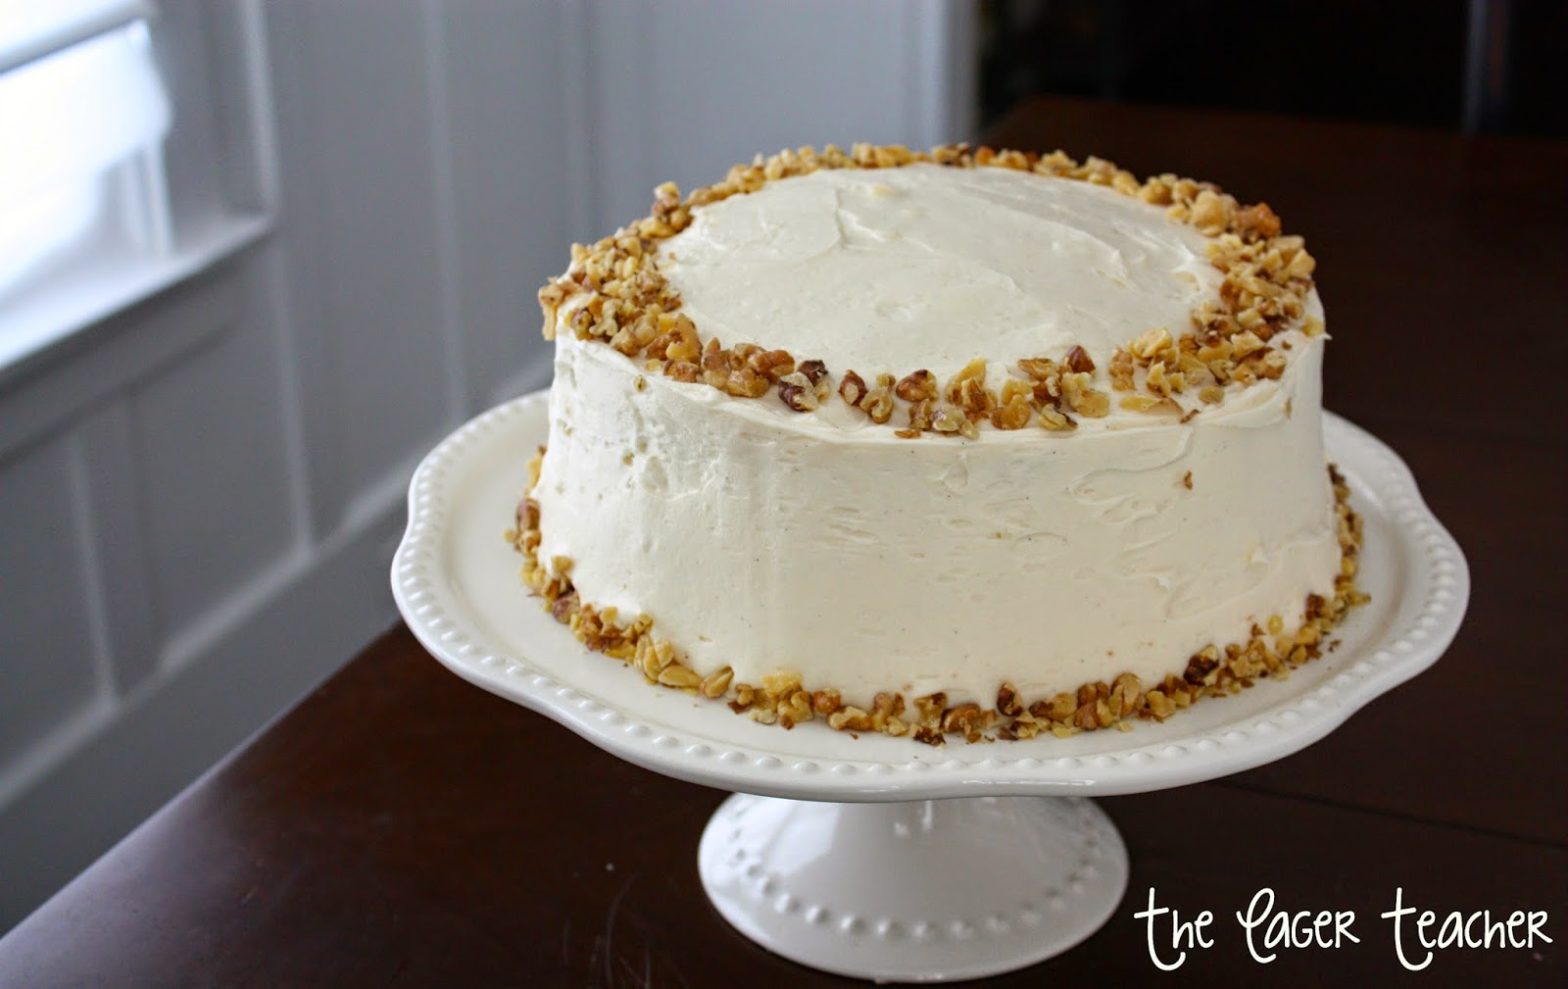 Momma’s Carrot Cake with Cream Cheese Frosting